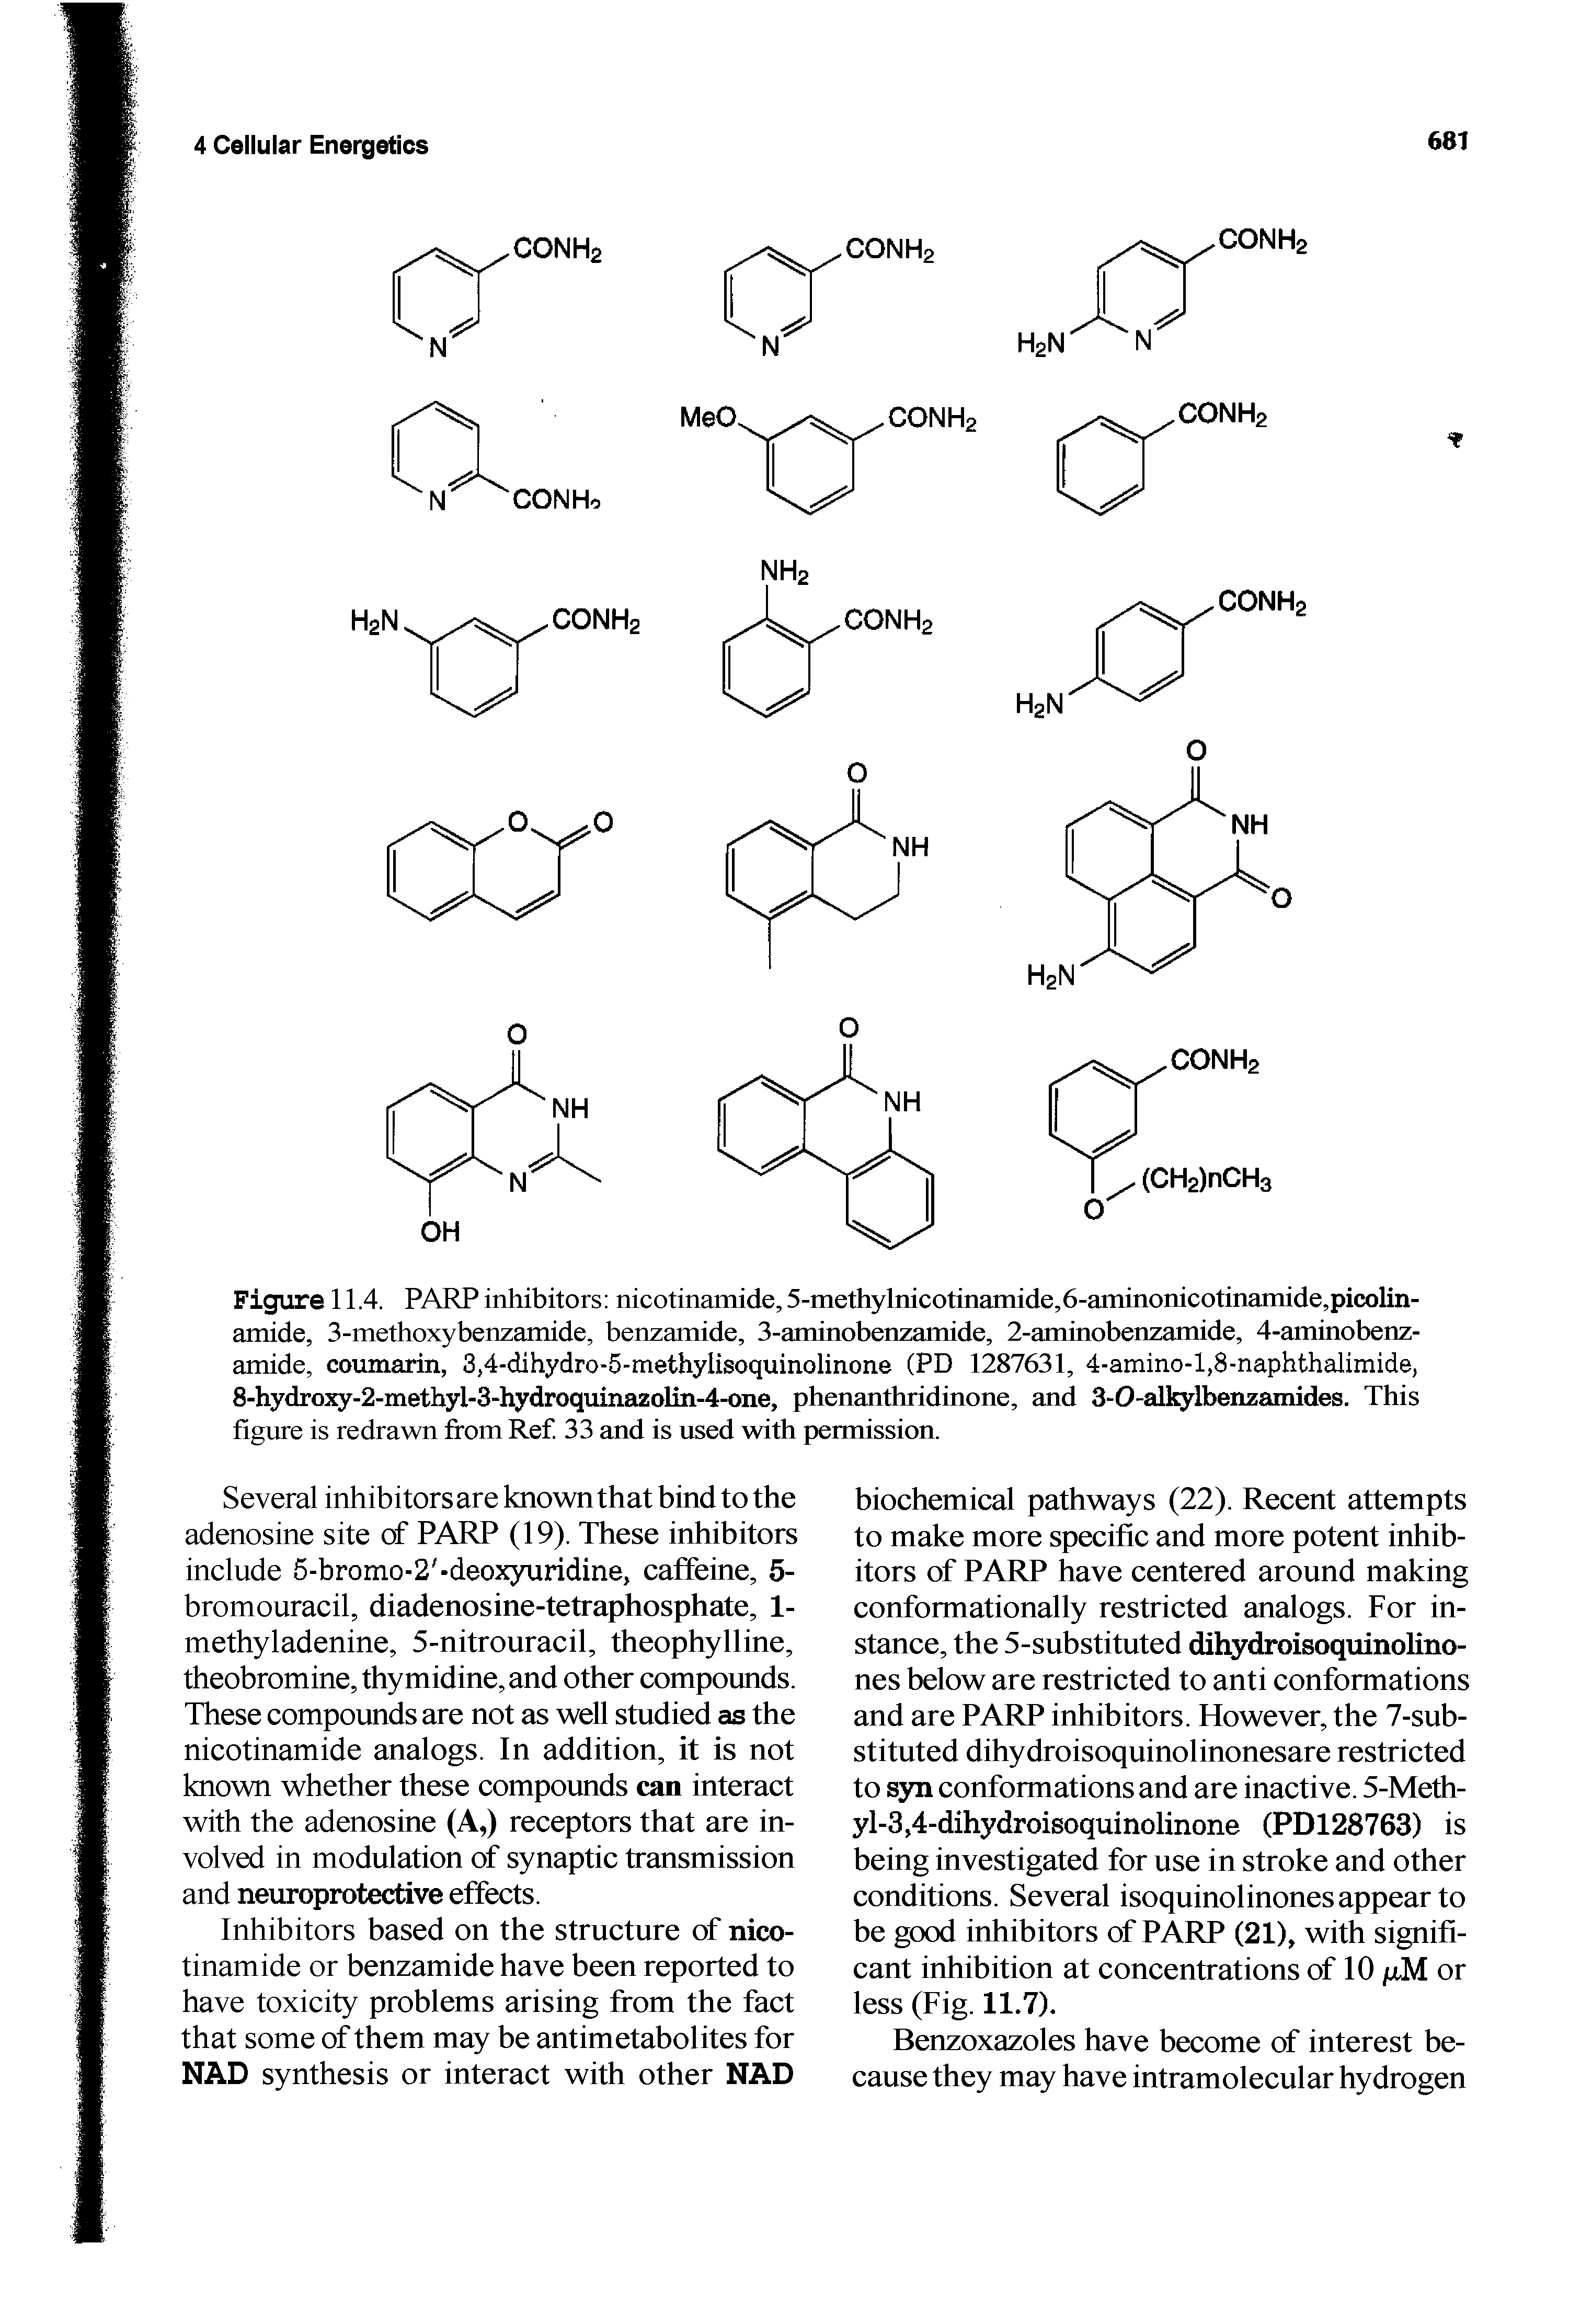 Figure 11.4. PARP inhibitors nicotinamide, 5-methylnicotinamide,6-aminonicotinamide,picolin-amide, 3-methoxybenzamide, benzamide, 3-aminobenzamide, 2-aminobenzamide, 4-aminobenz-amide, coumarin, 3,4-dihydro-5-methylisoquinolinone (PD 1287631, 4-amino-l,8-naphthalimide, 8-hydroxy-2-methyl-3-hydroquina2olin-4-one, phenanthridinone, and 3-0-allQ lbenzamides. This figure is redrawn from Ref 33 and is used with permission.